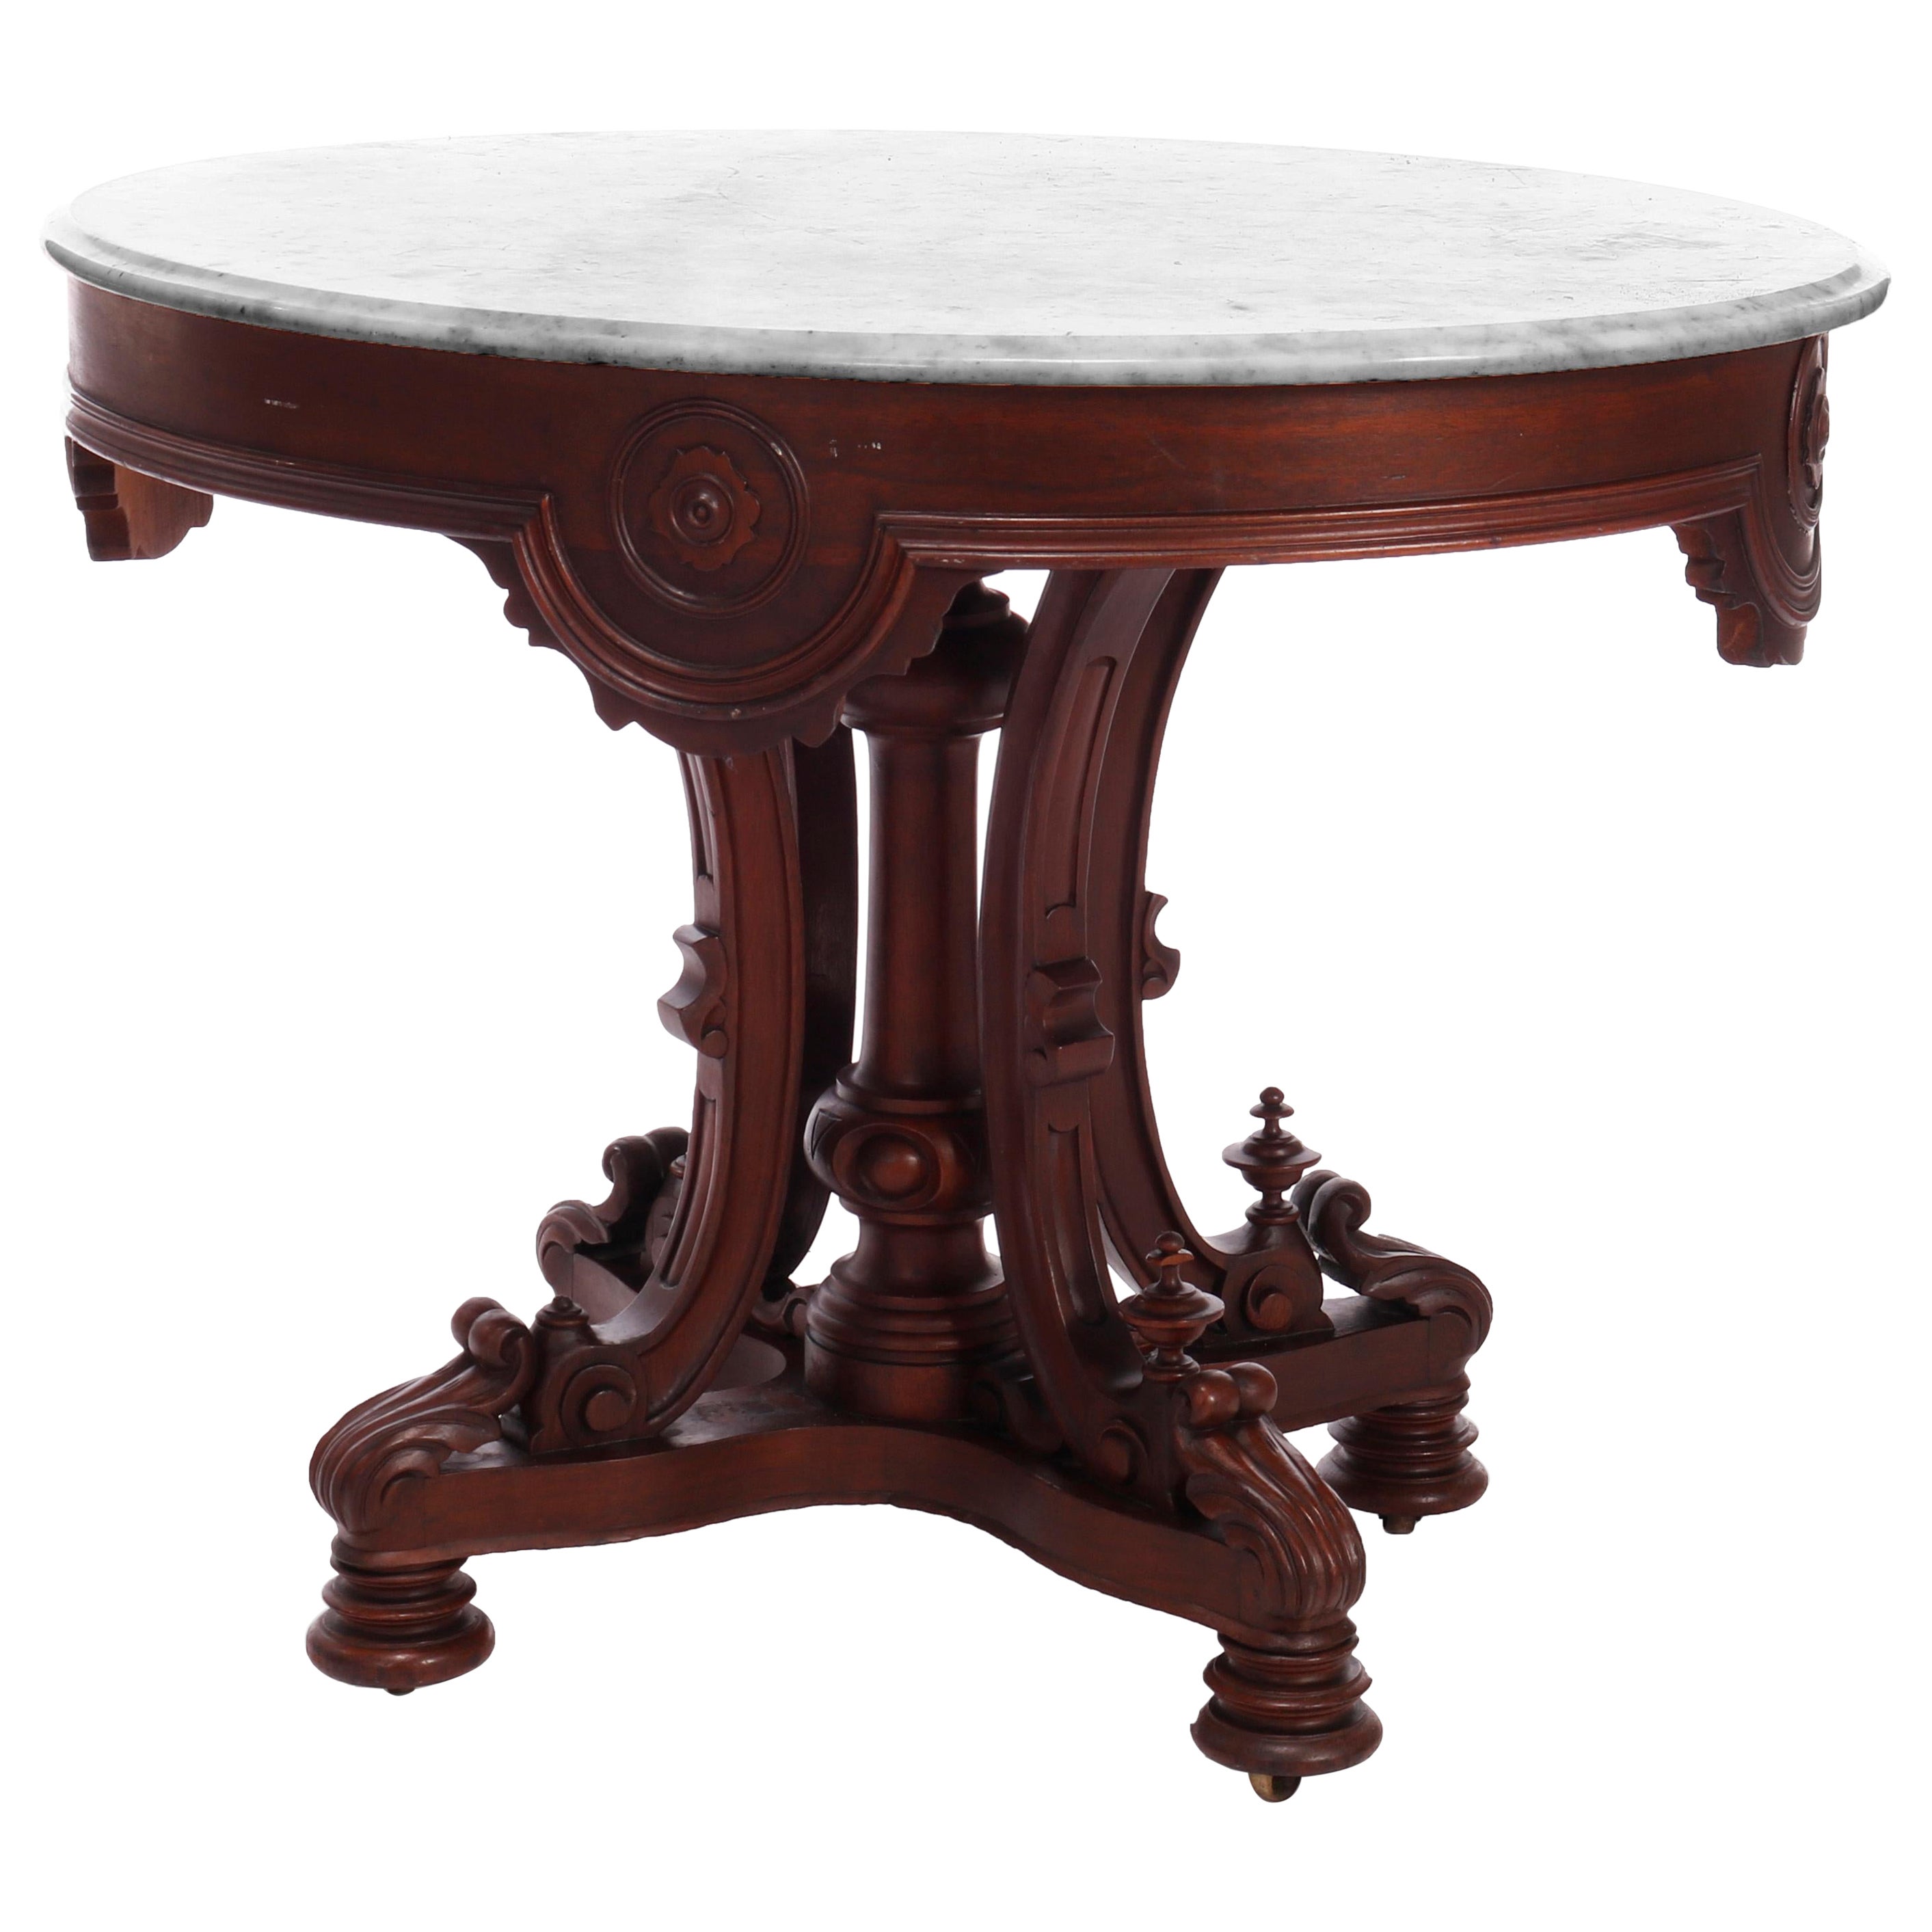 Antique Rococo Revival Carved Rosewood Oval Marble Top Table, Circa 1870